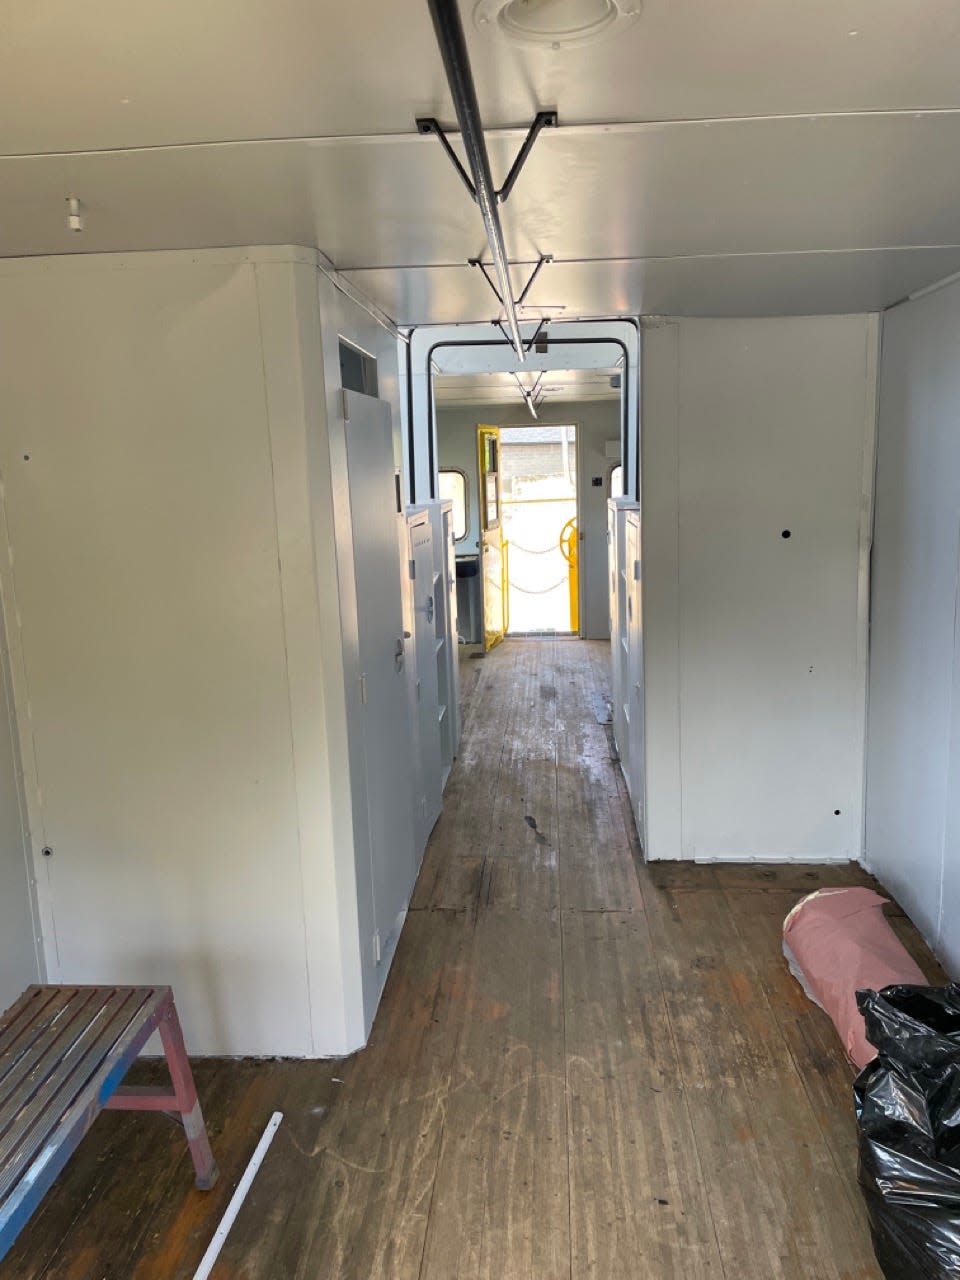 Newly painted white walls and oak flooring inside the Chessie System caboose.